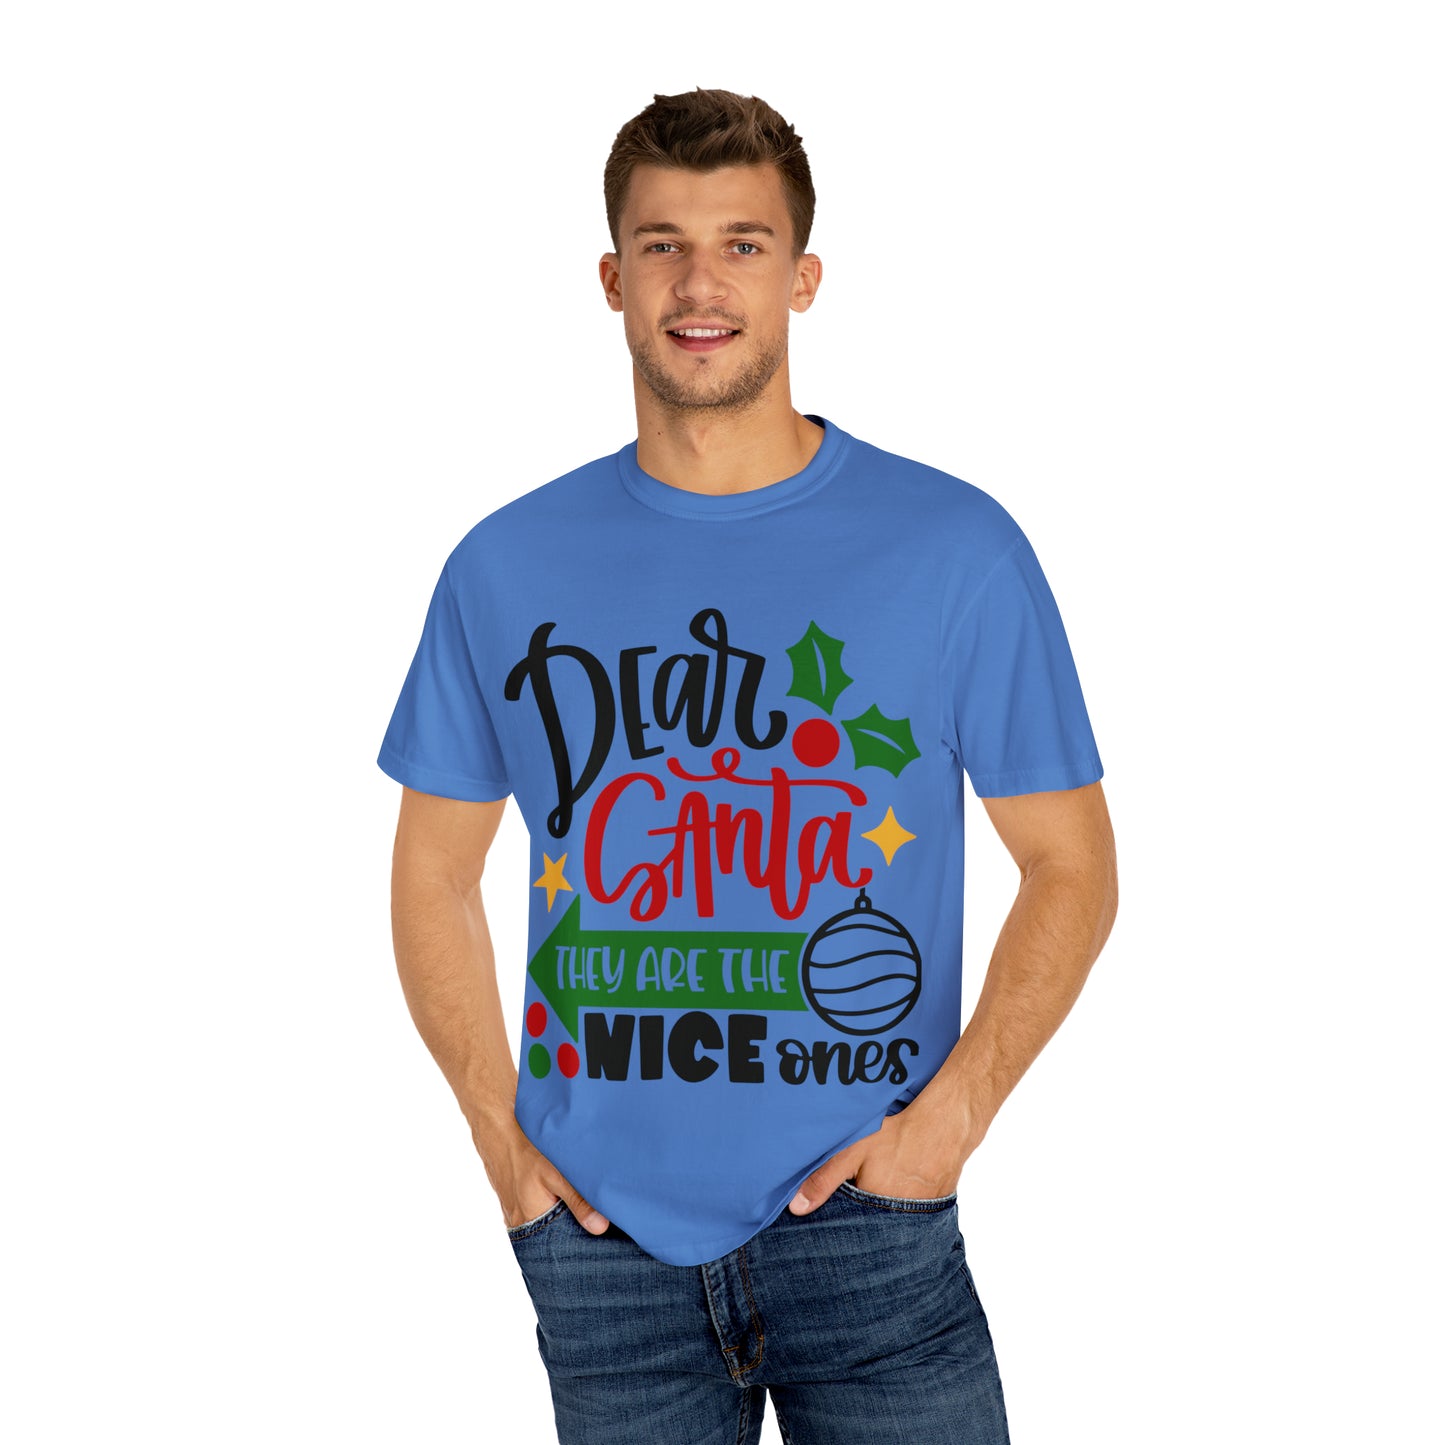 They Are the Naughty Ones Unisex Garment-Dyed T-shirt